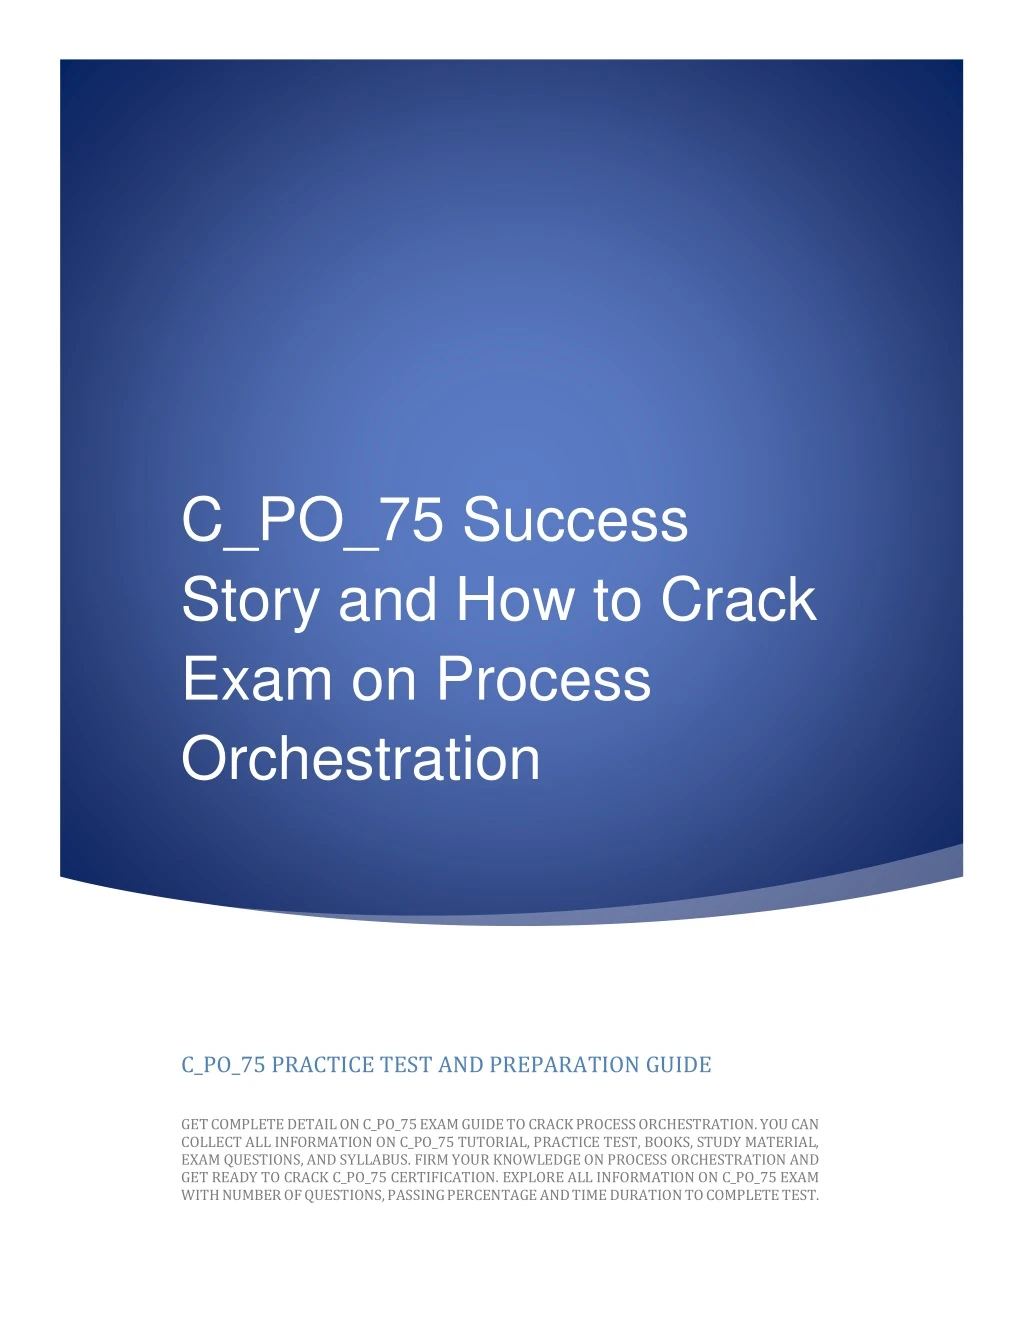 c po 75 success story and how to crack exam